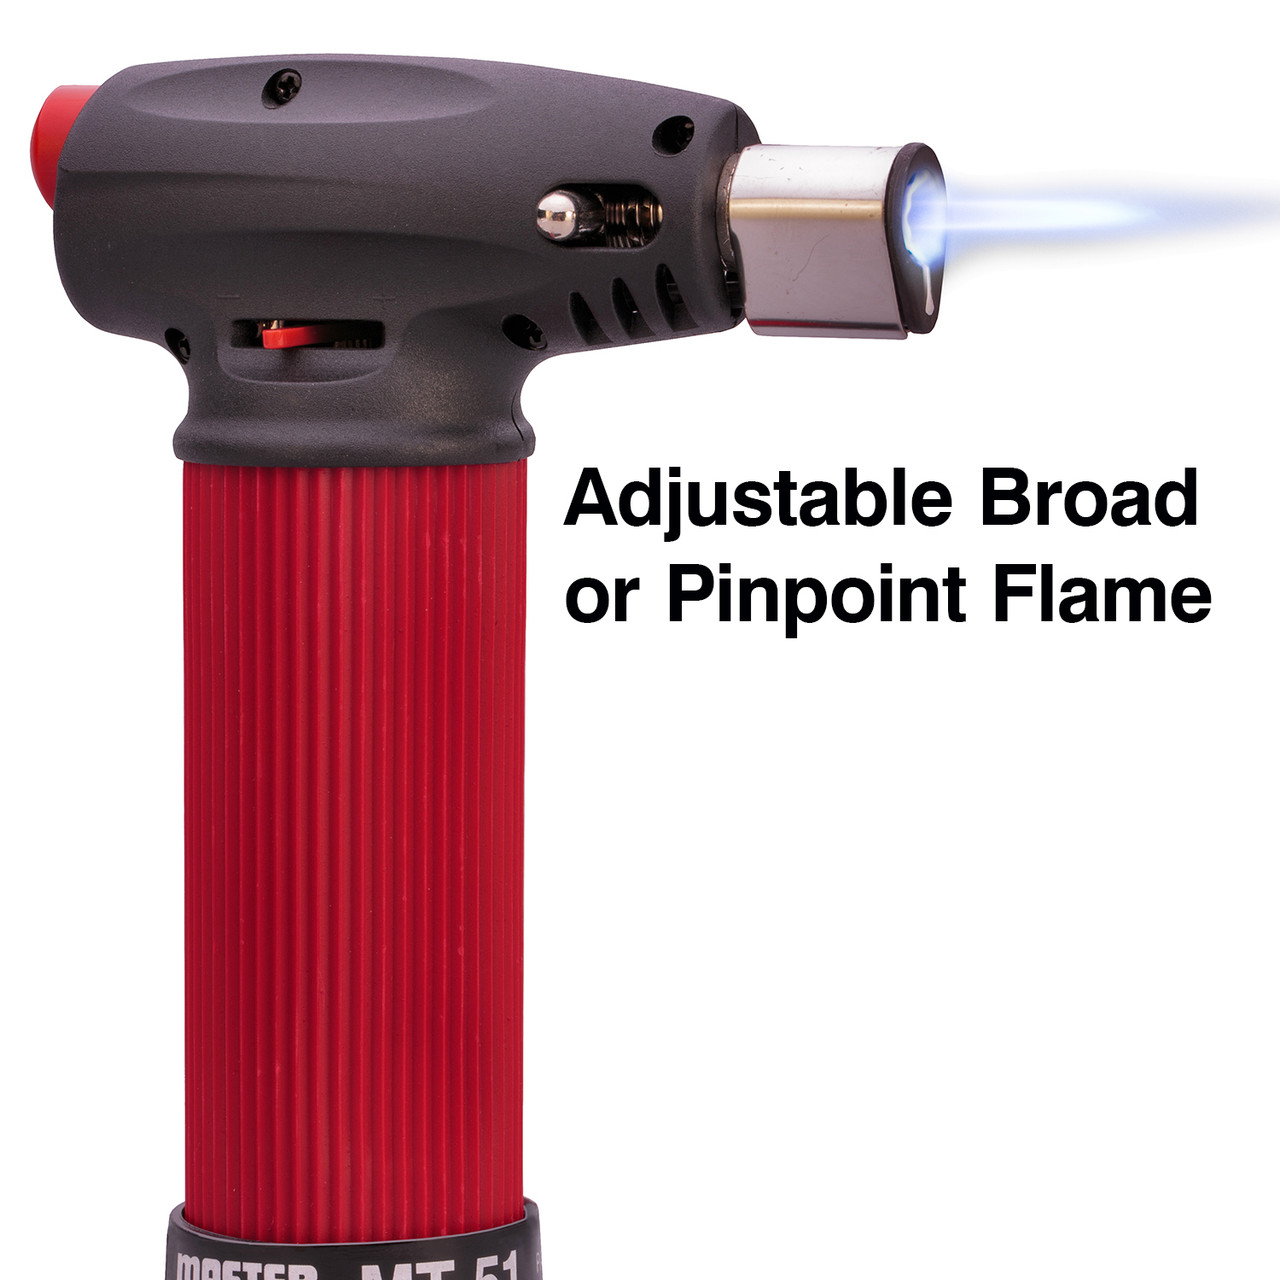 High Performance Butane Microtorch MT-51 | Master Appliance